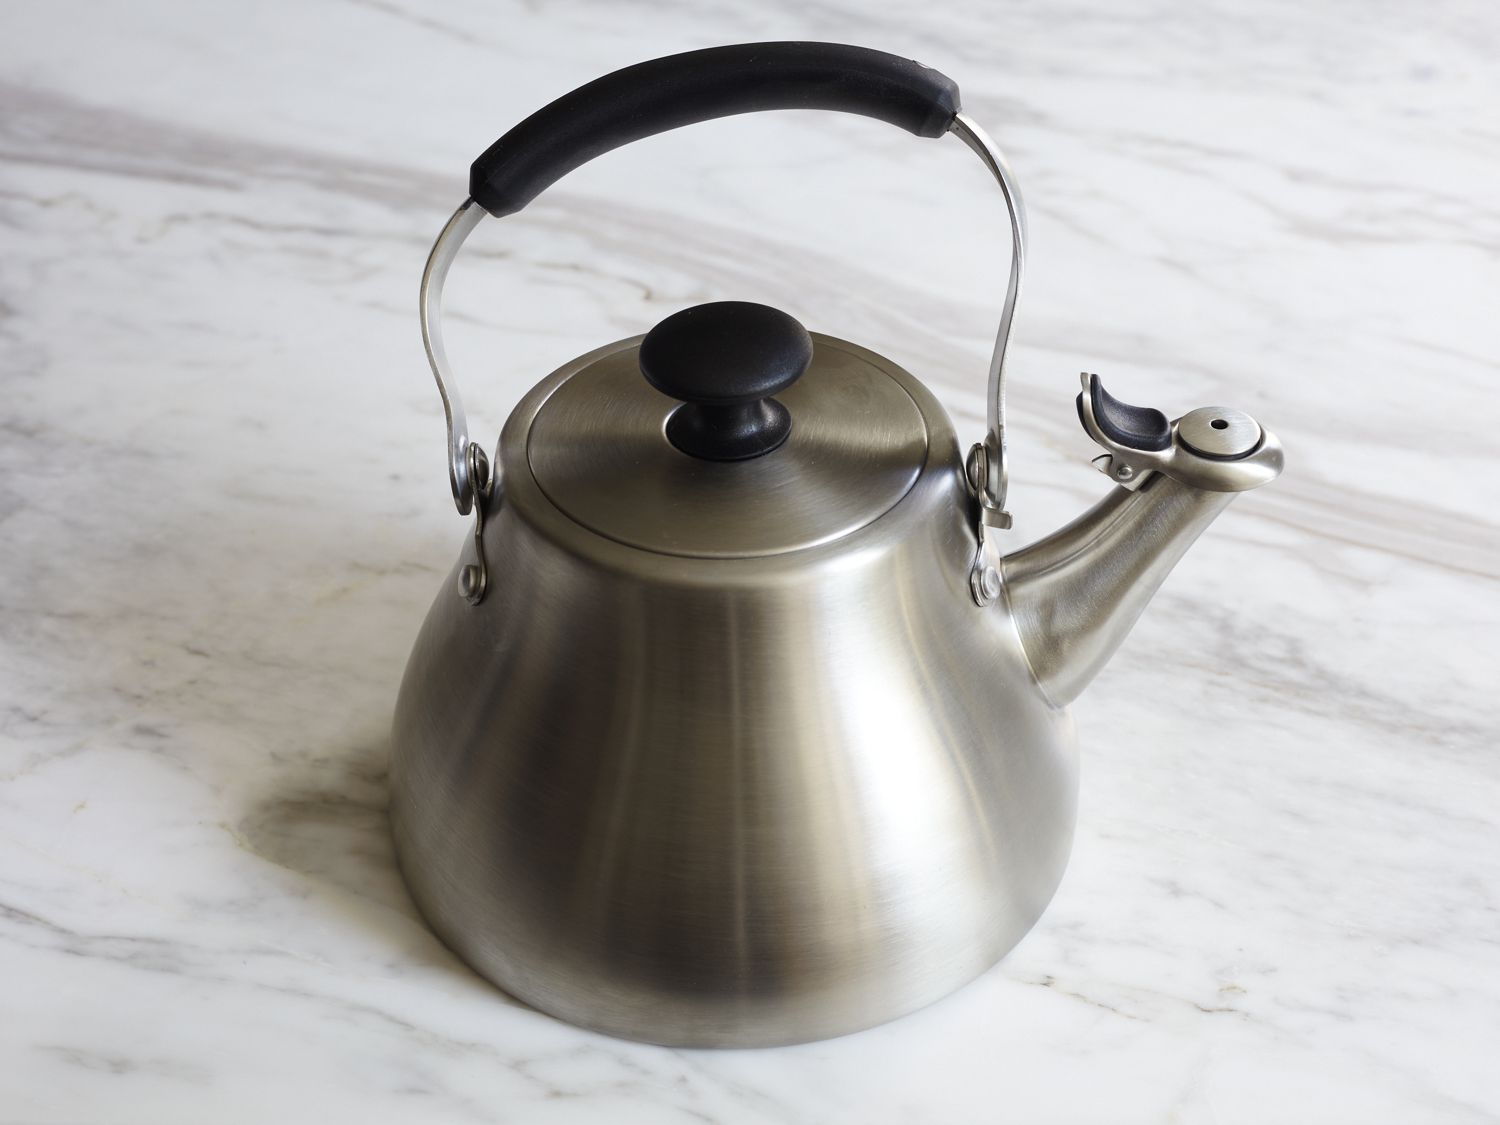 How To Clean The Inside Of A Stainless Steel Tea Kettle